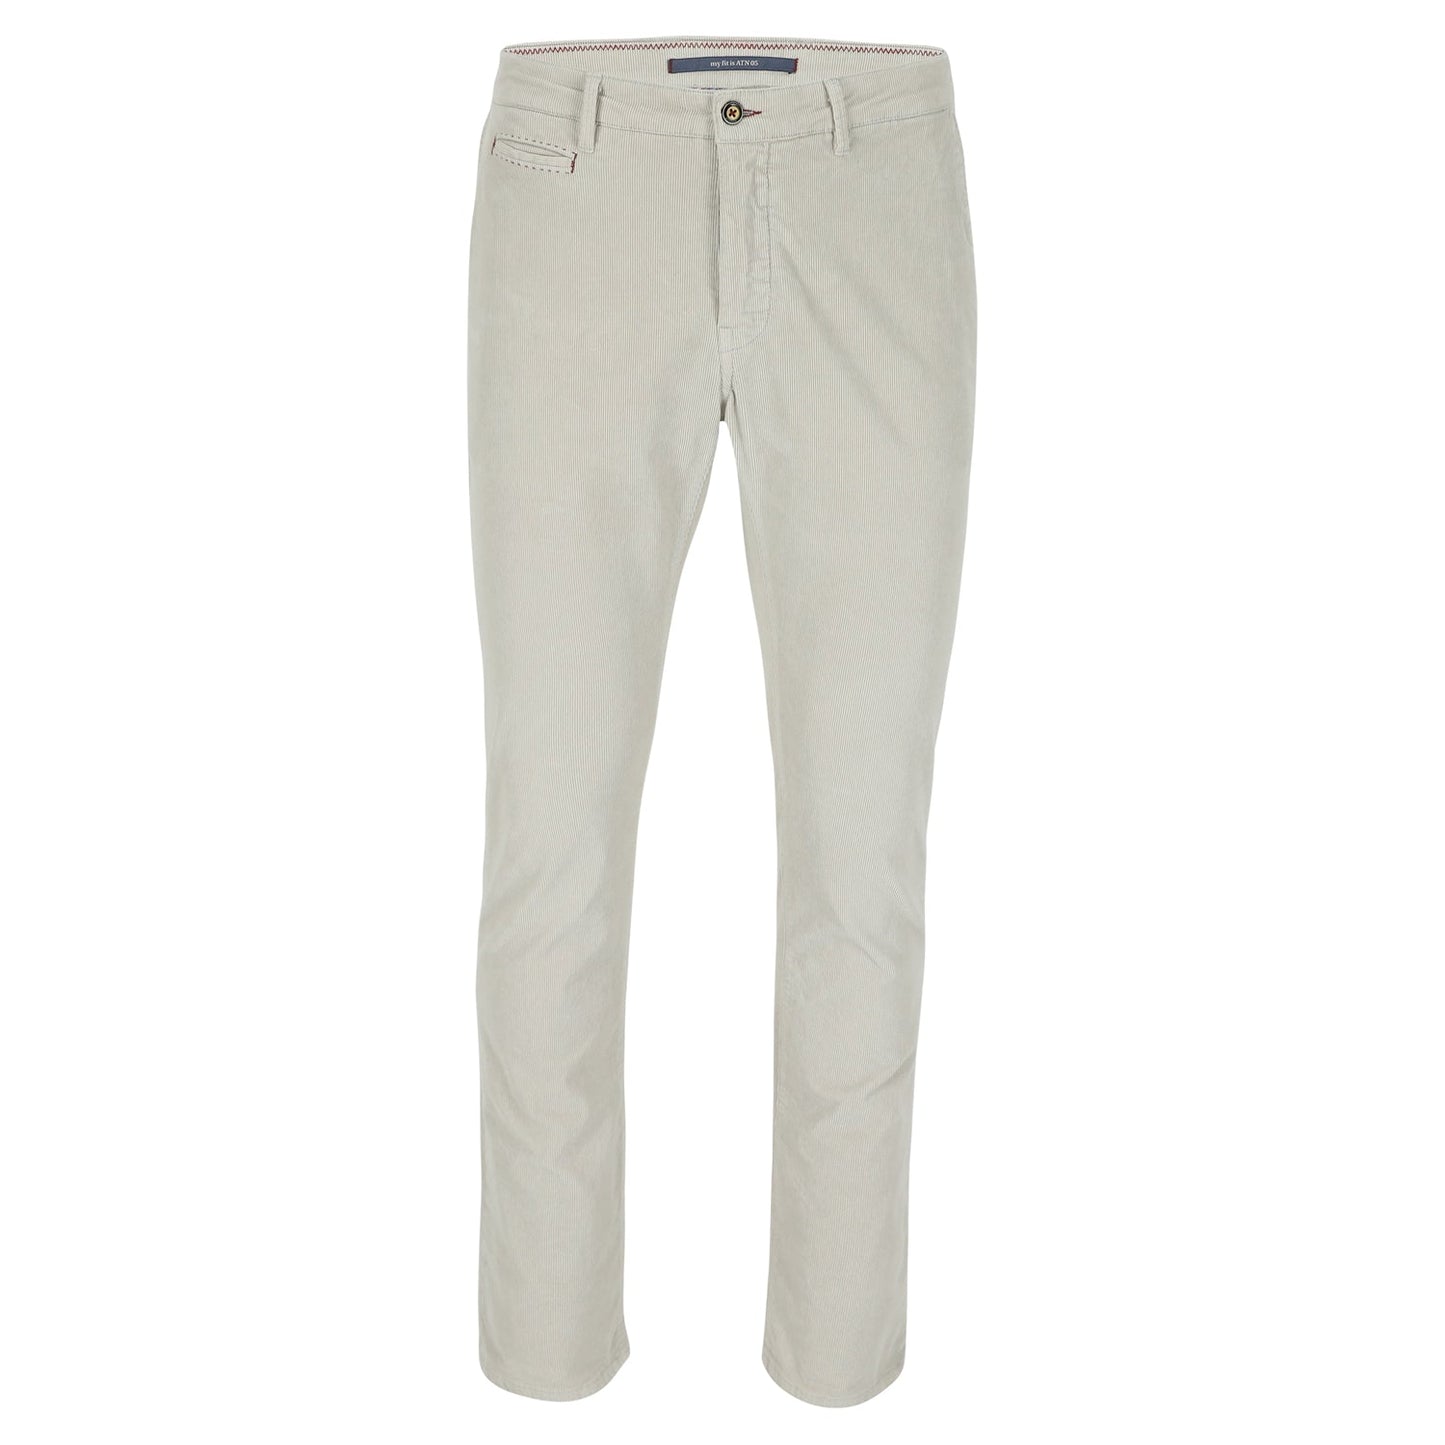 Offwhite corduroy slim fit trousers Atelier Noterman - 1585/737